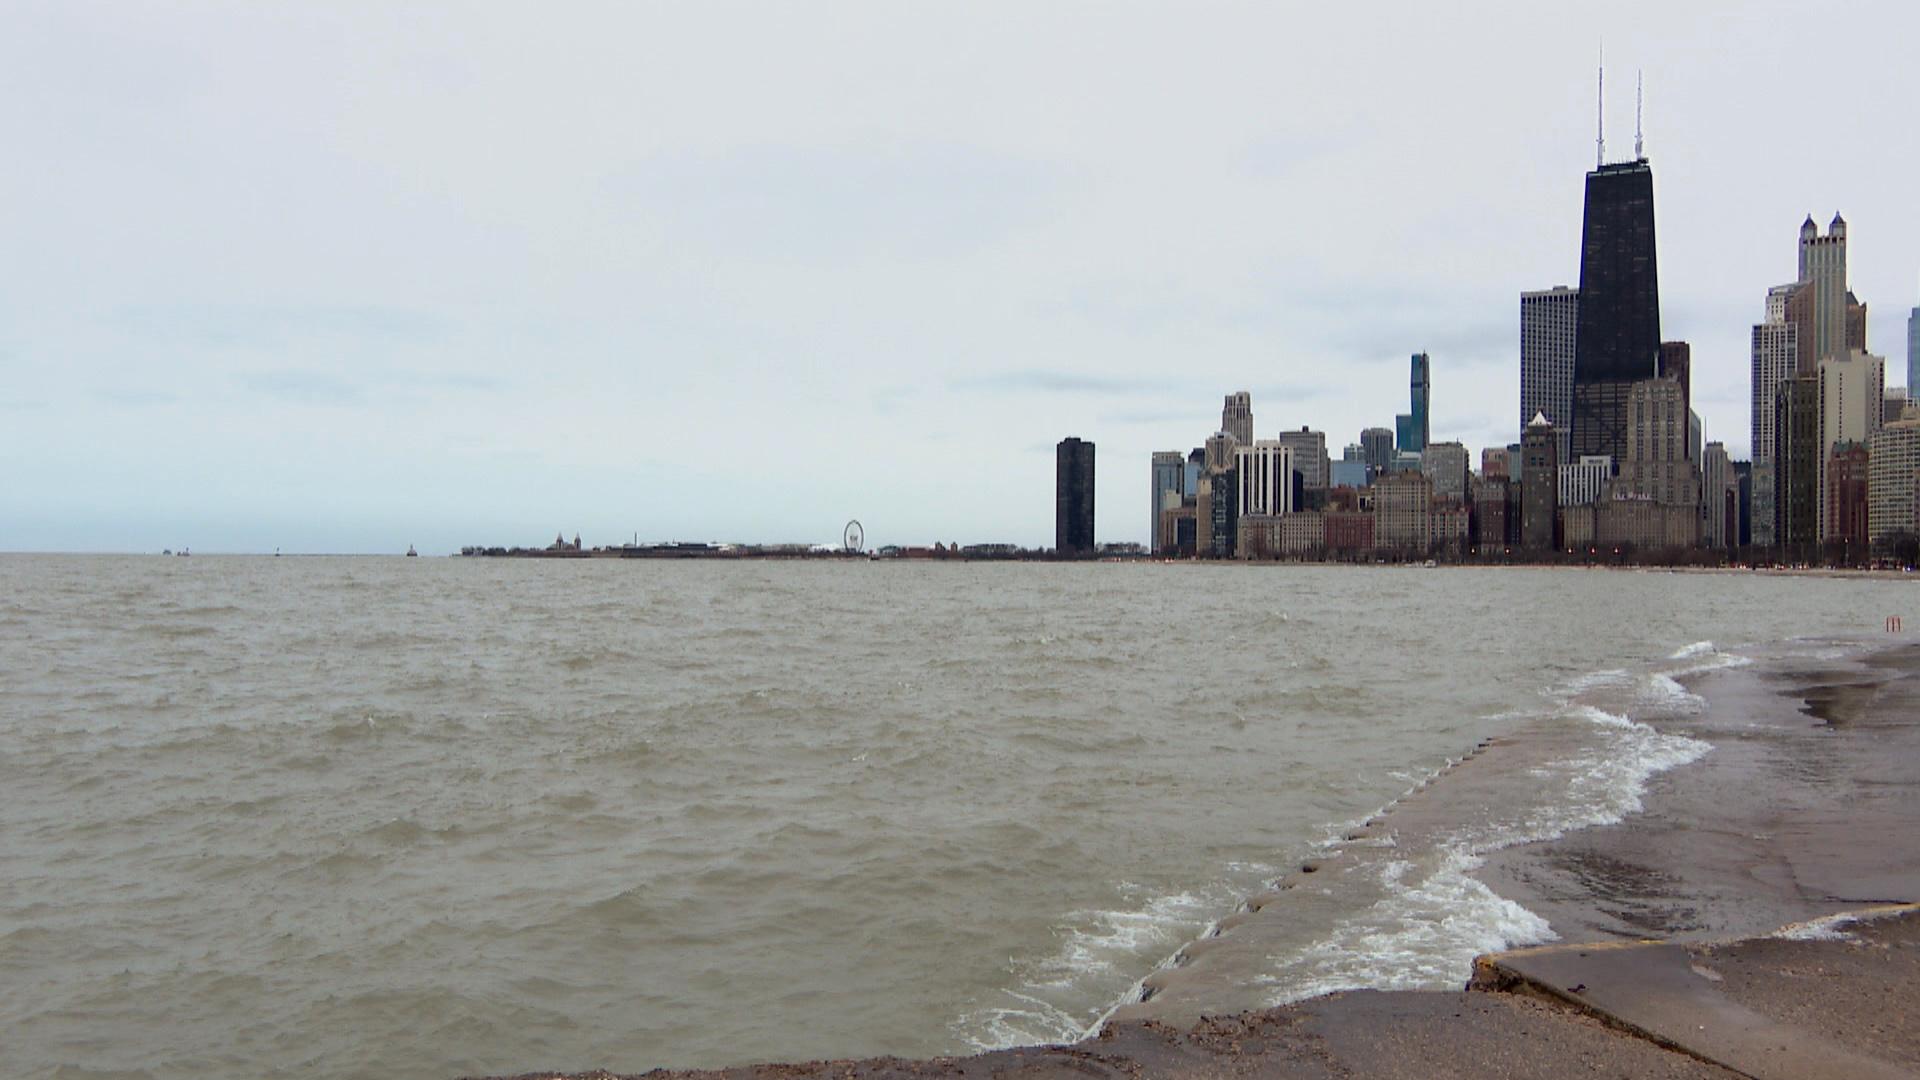 Lake Michigan and the Chicago skyline on Wednesday, Feb. 5, 2020. (WTTW News)